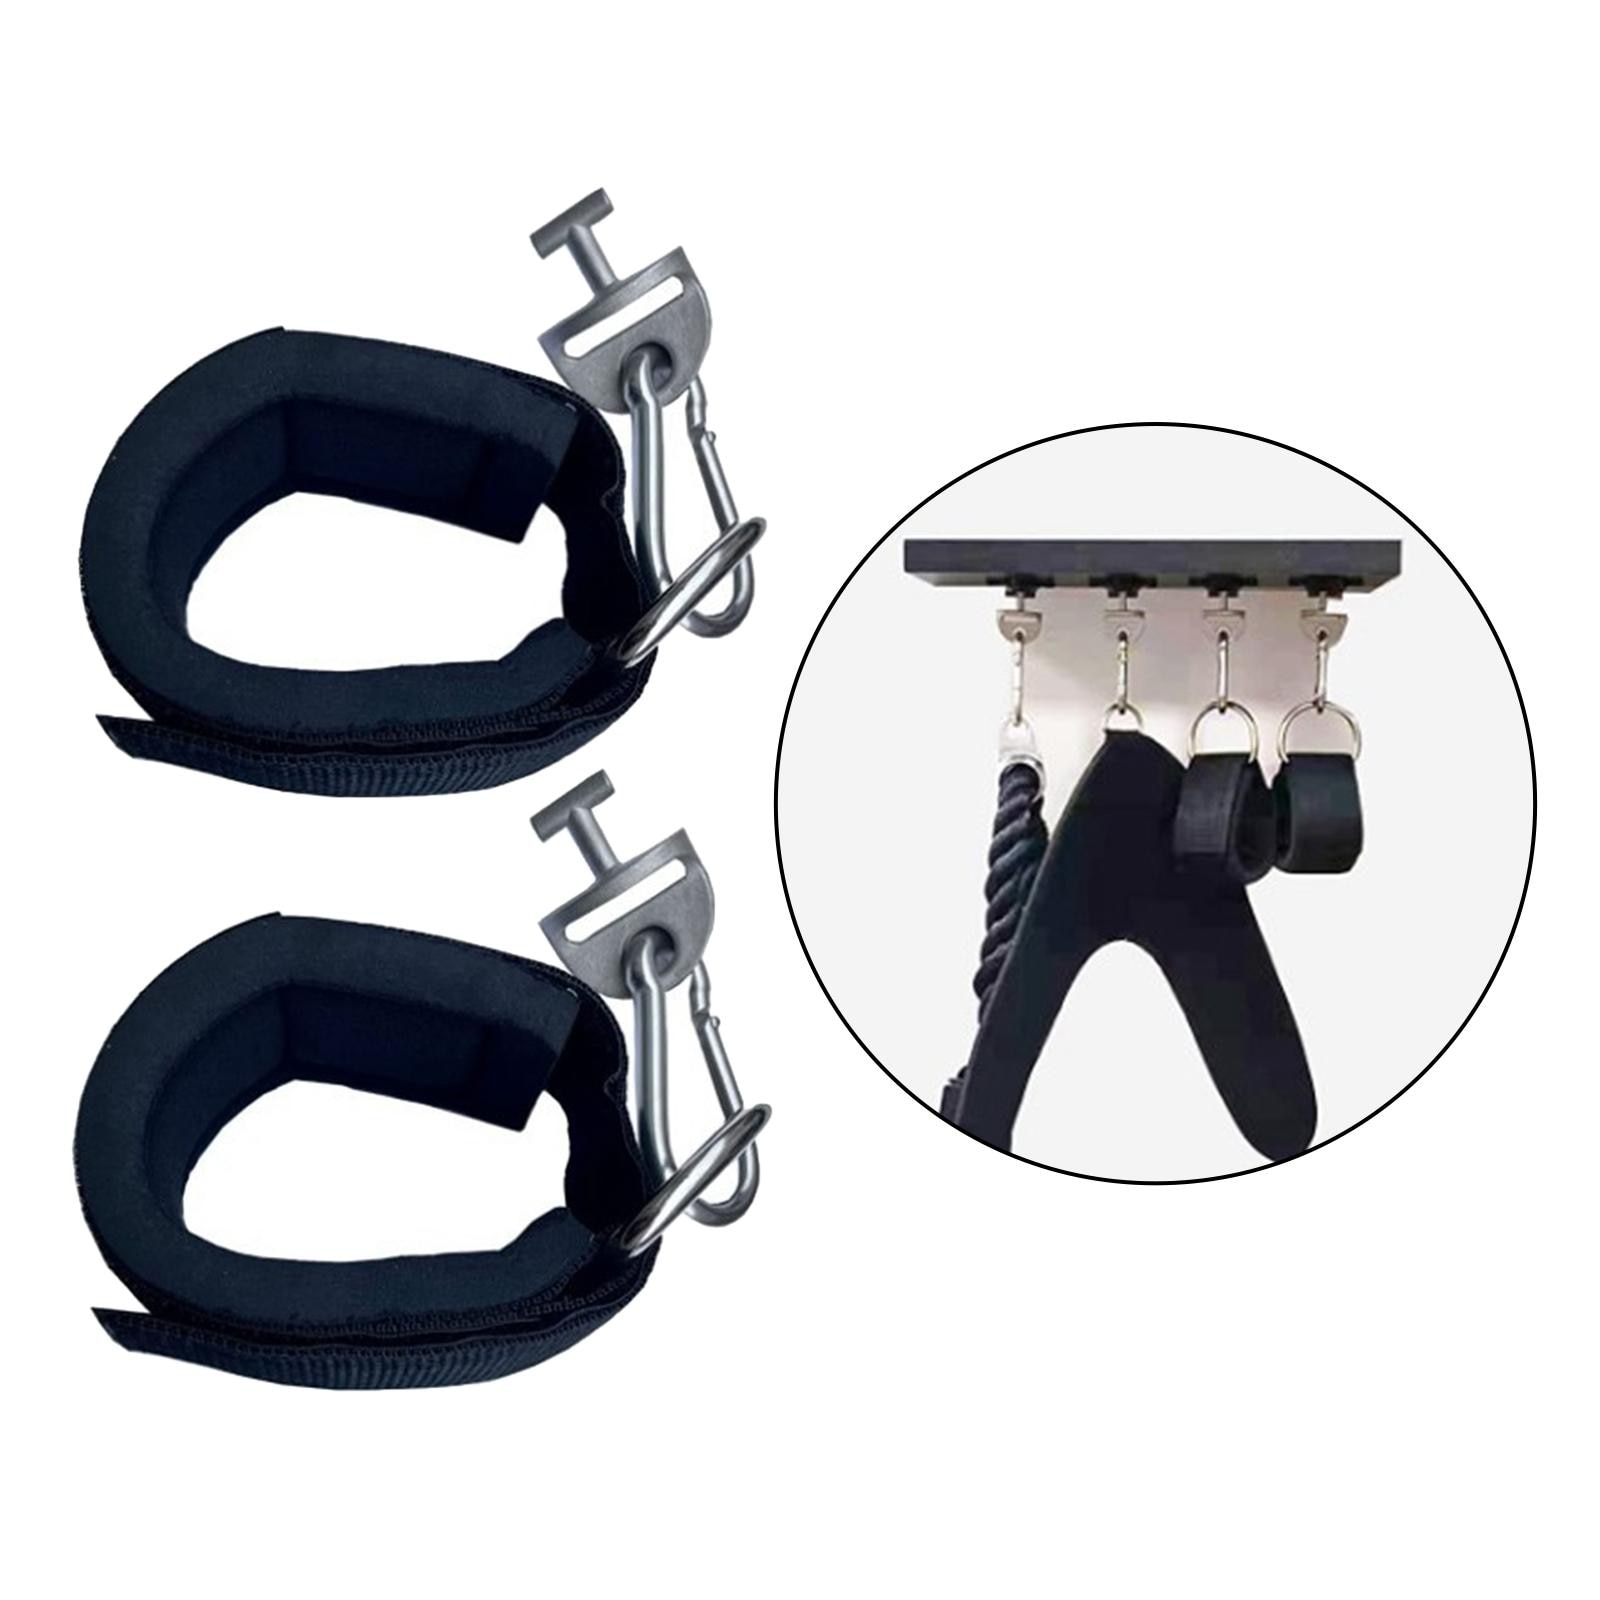 Ankle Straps with Tonal Adapters Exercise Machine Attachments for Kickbacks Leg Extensions Glute Hip Abductors Strength Training